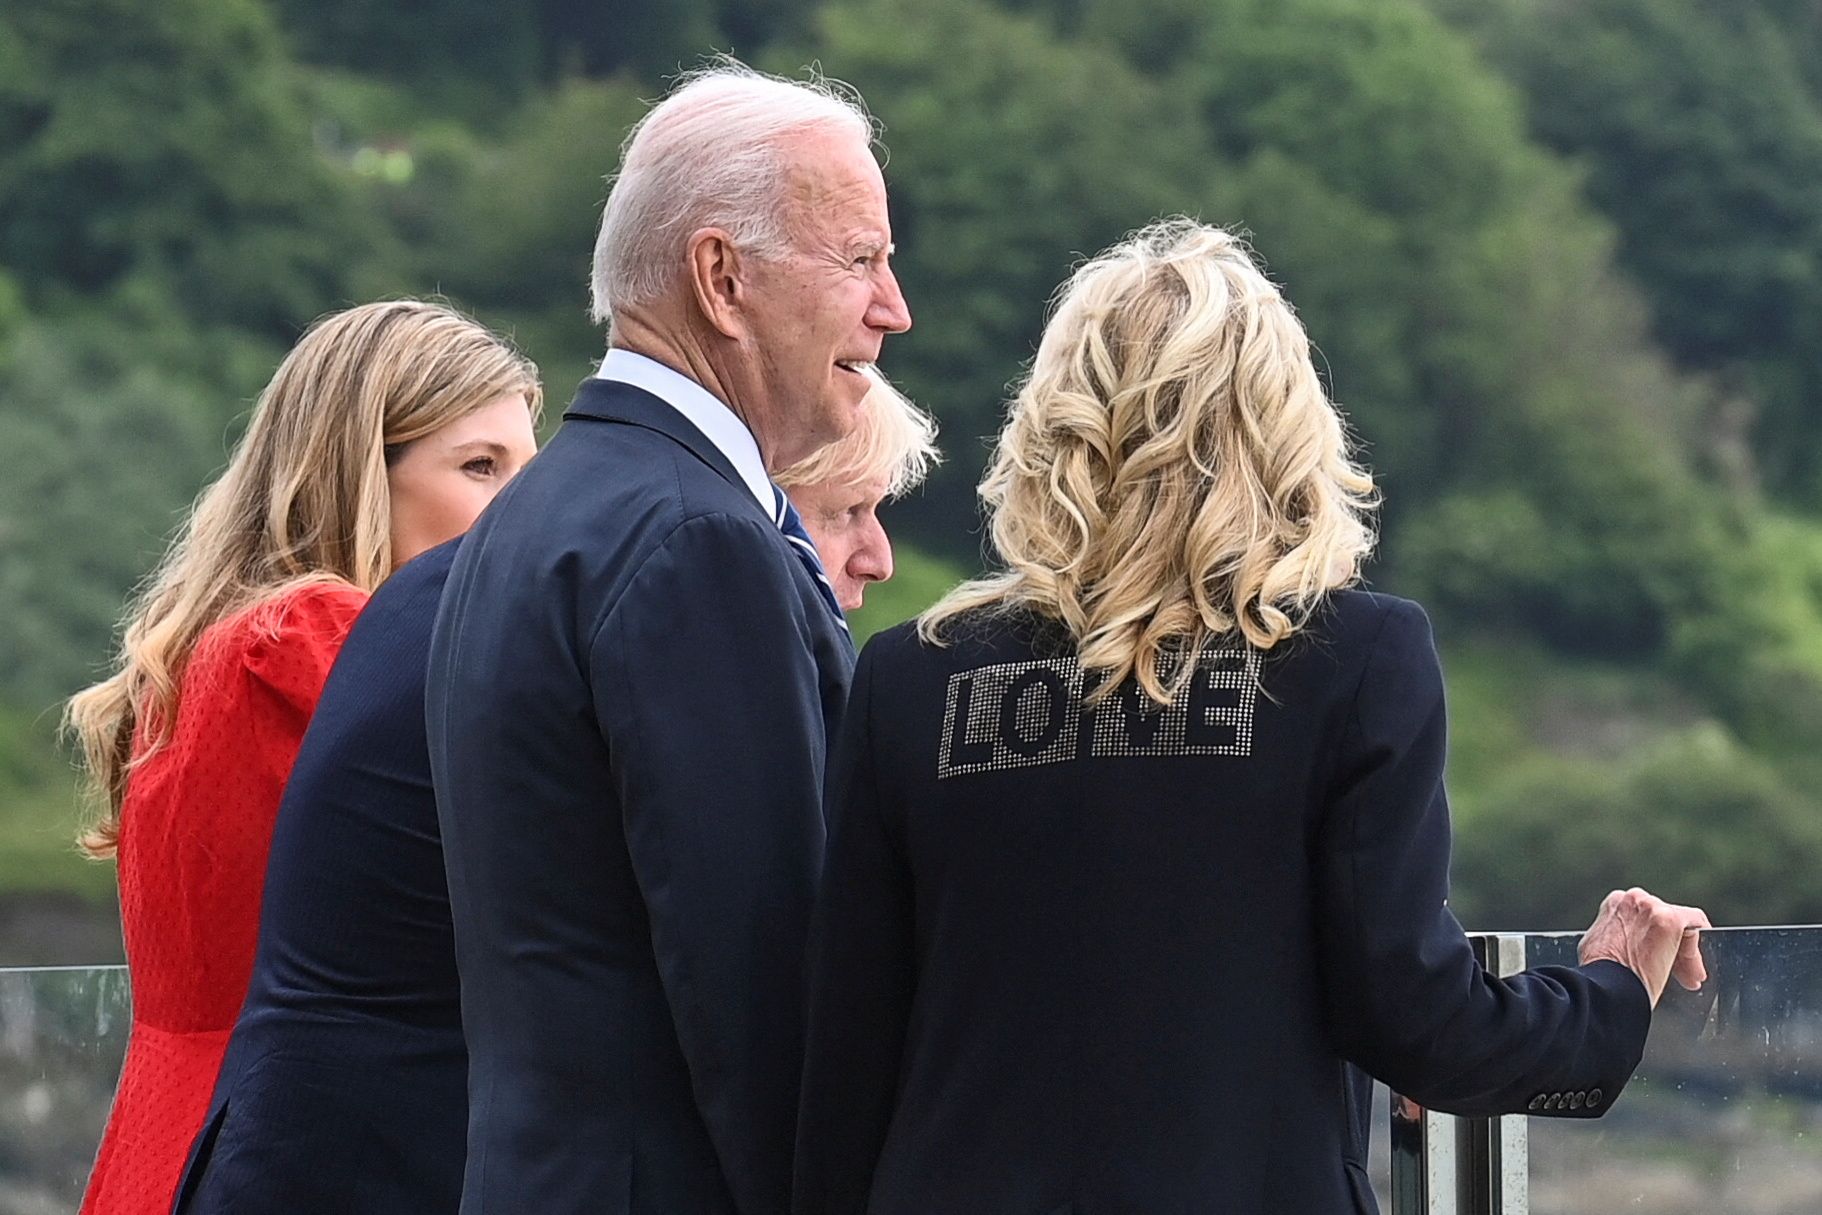 britains prime minister boris johnson 2r, his wife carrie johnson l and us president joe biden and us first lady jill biden, wearing a jacket bearing the words love, look out over the sea, prior to a bi lateral meeting at carbis bay, cornwall on june 10, 2021, ahead of the three day g7 summit being held from 11 13 june   g7 leaders from canada, france, germany, italy, japan, the uk and the united states meet this weekend for the first time in nearly two years, for the three day talks in carbis bay, cornwall   photo by toby melville  pool  afp photo by toby melvillepoolafp via getty images